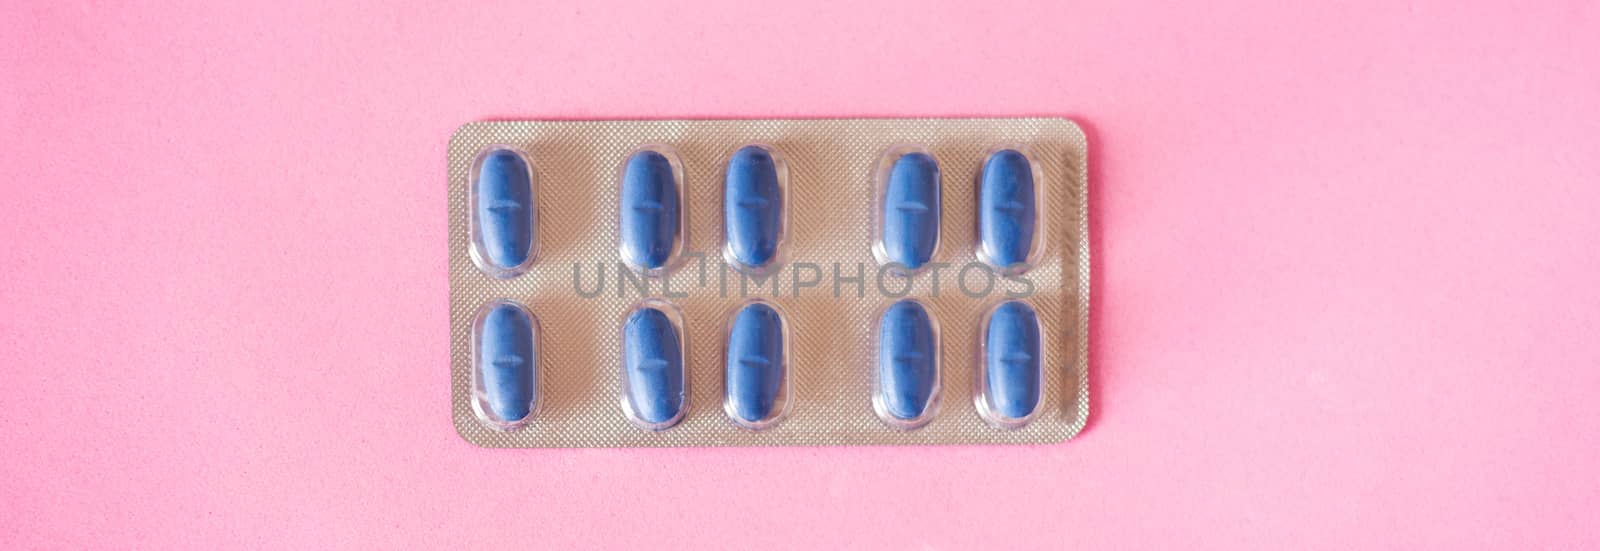 Blue medical pills on pink background. Panorama photo.